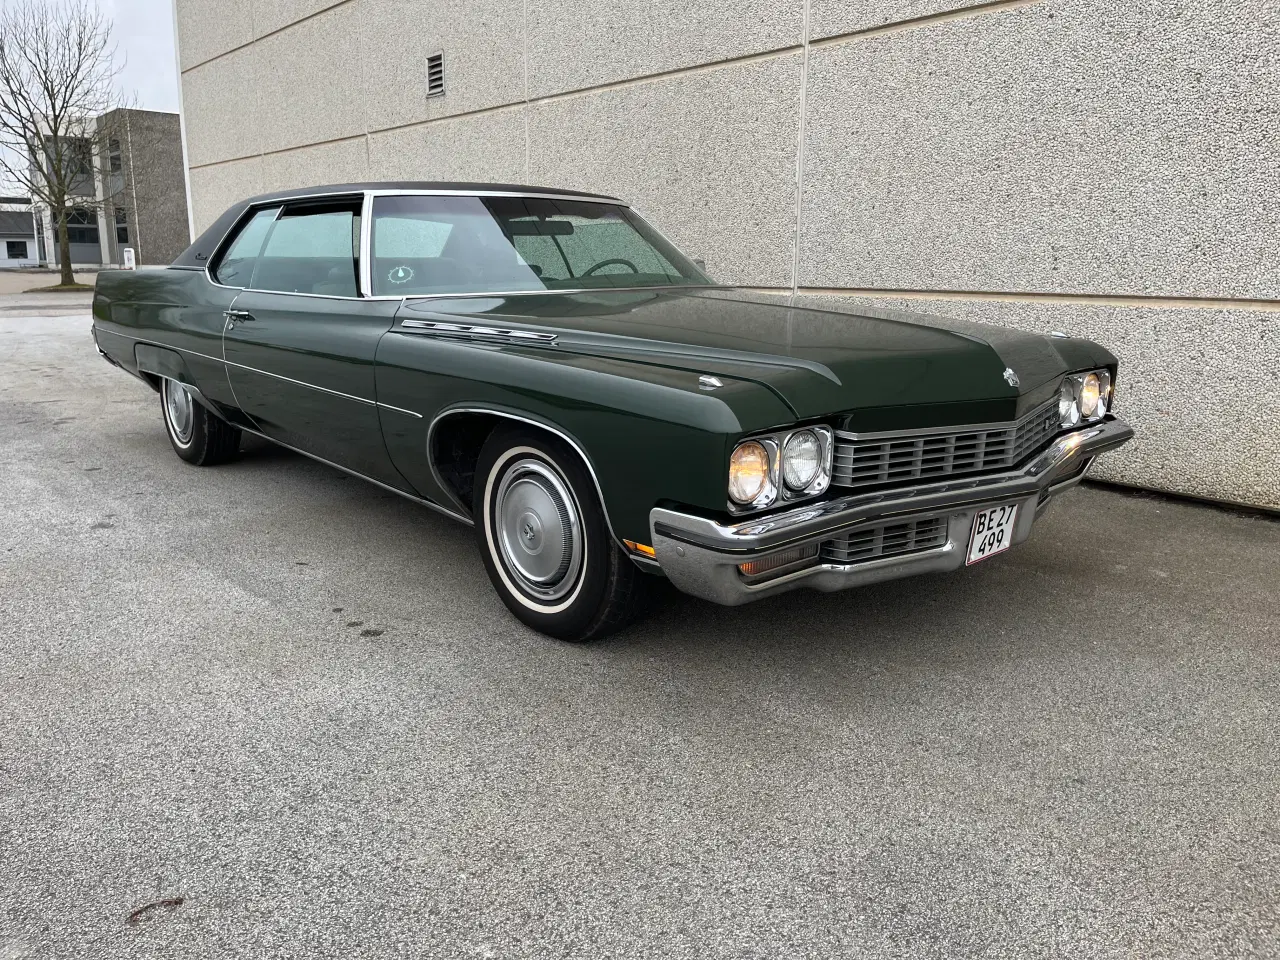 Billede 1 - Buick Electra 225 coupe